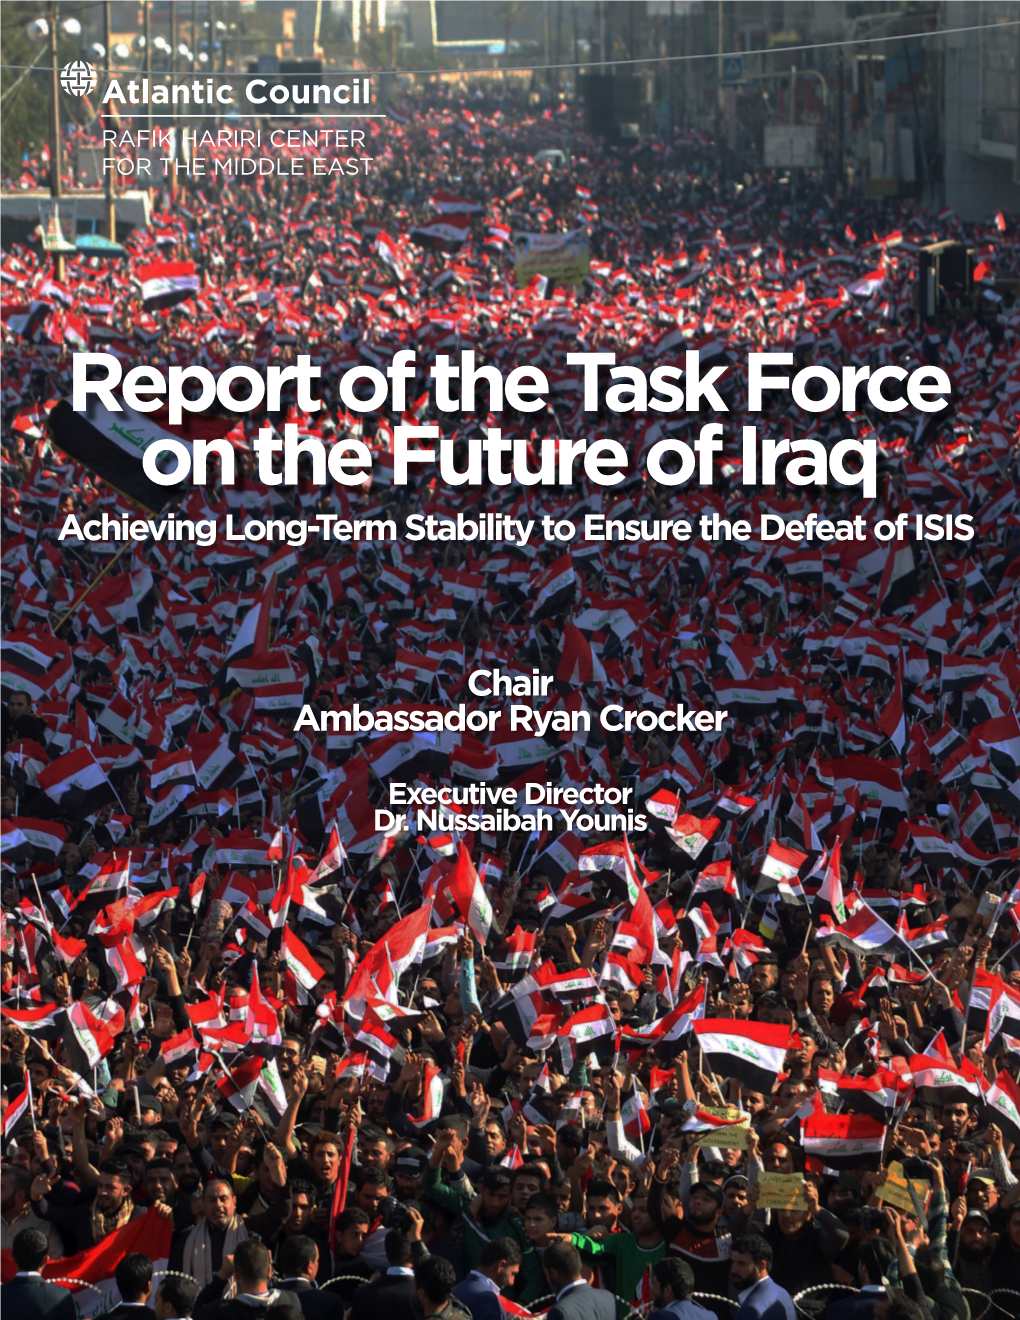 Report of the Task Force on the Future of Iraq Achieving Long-Term Stability to Ensure the Defeat of ISIS